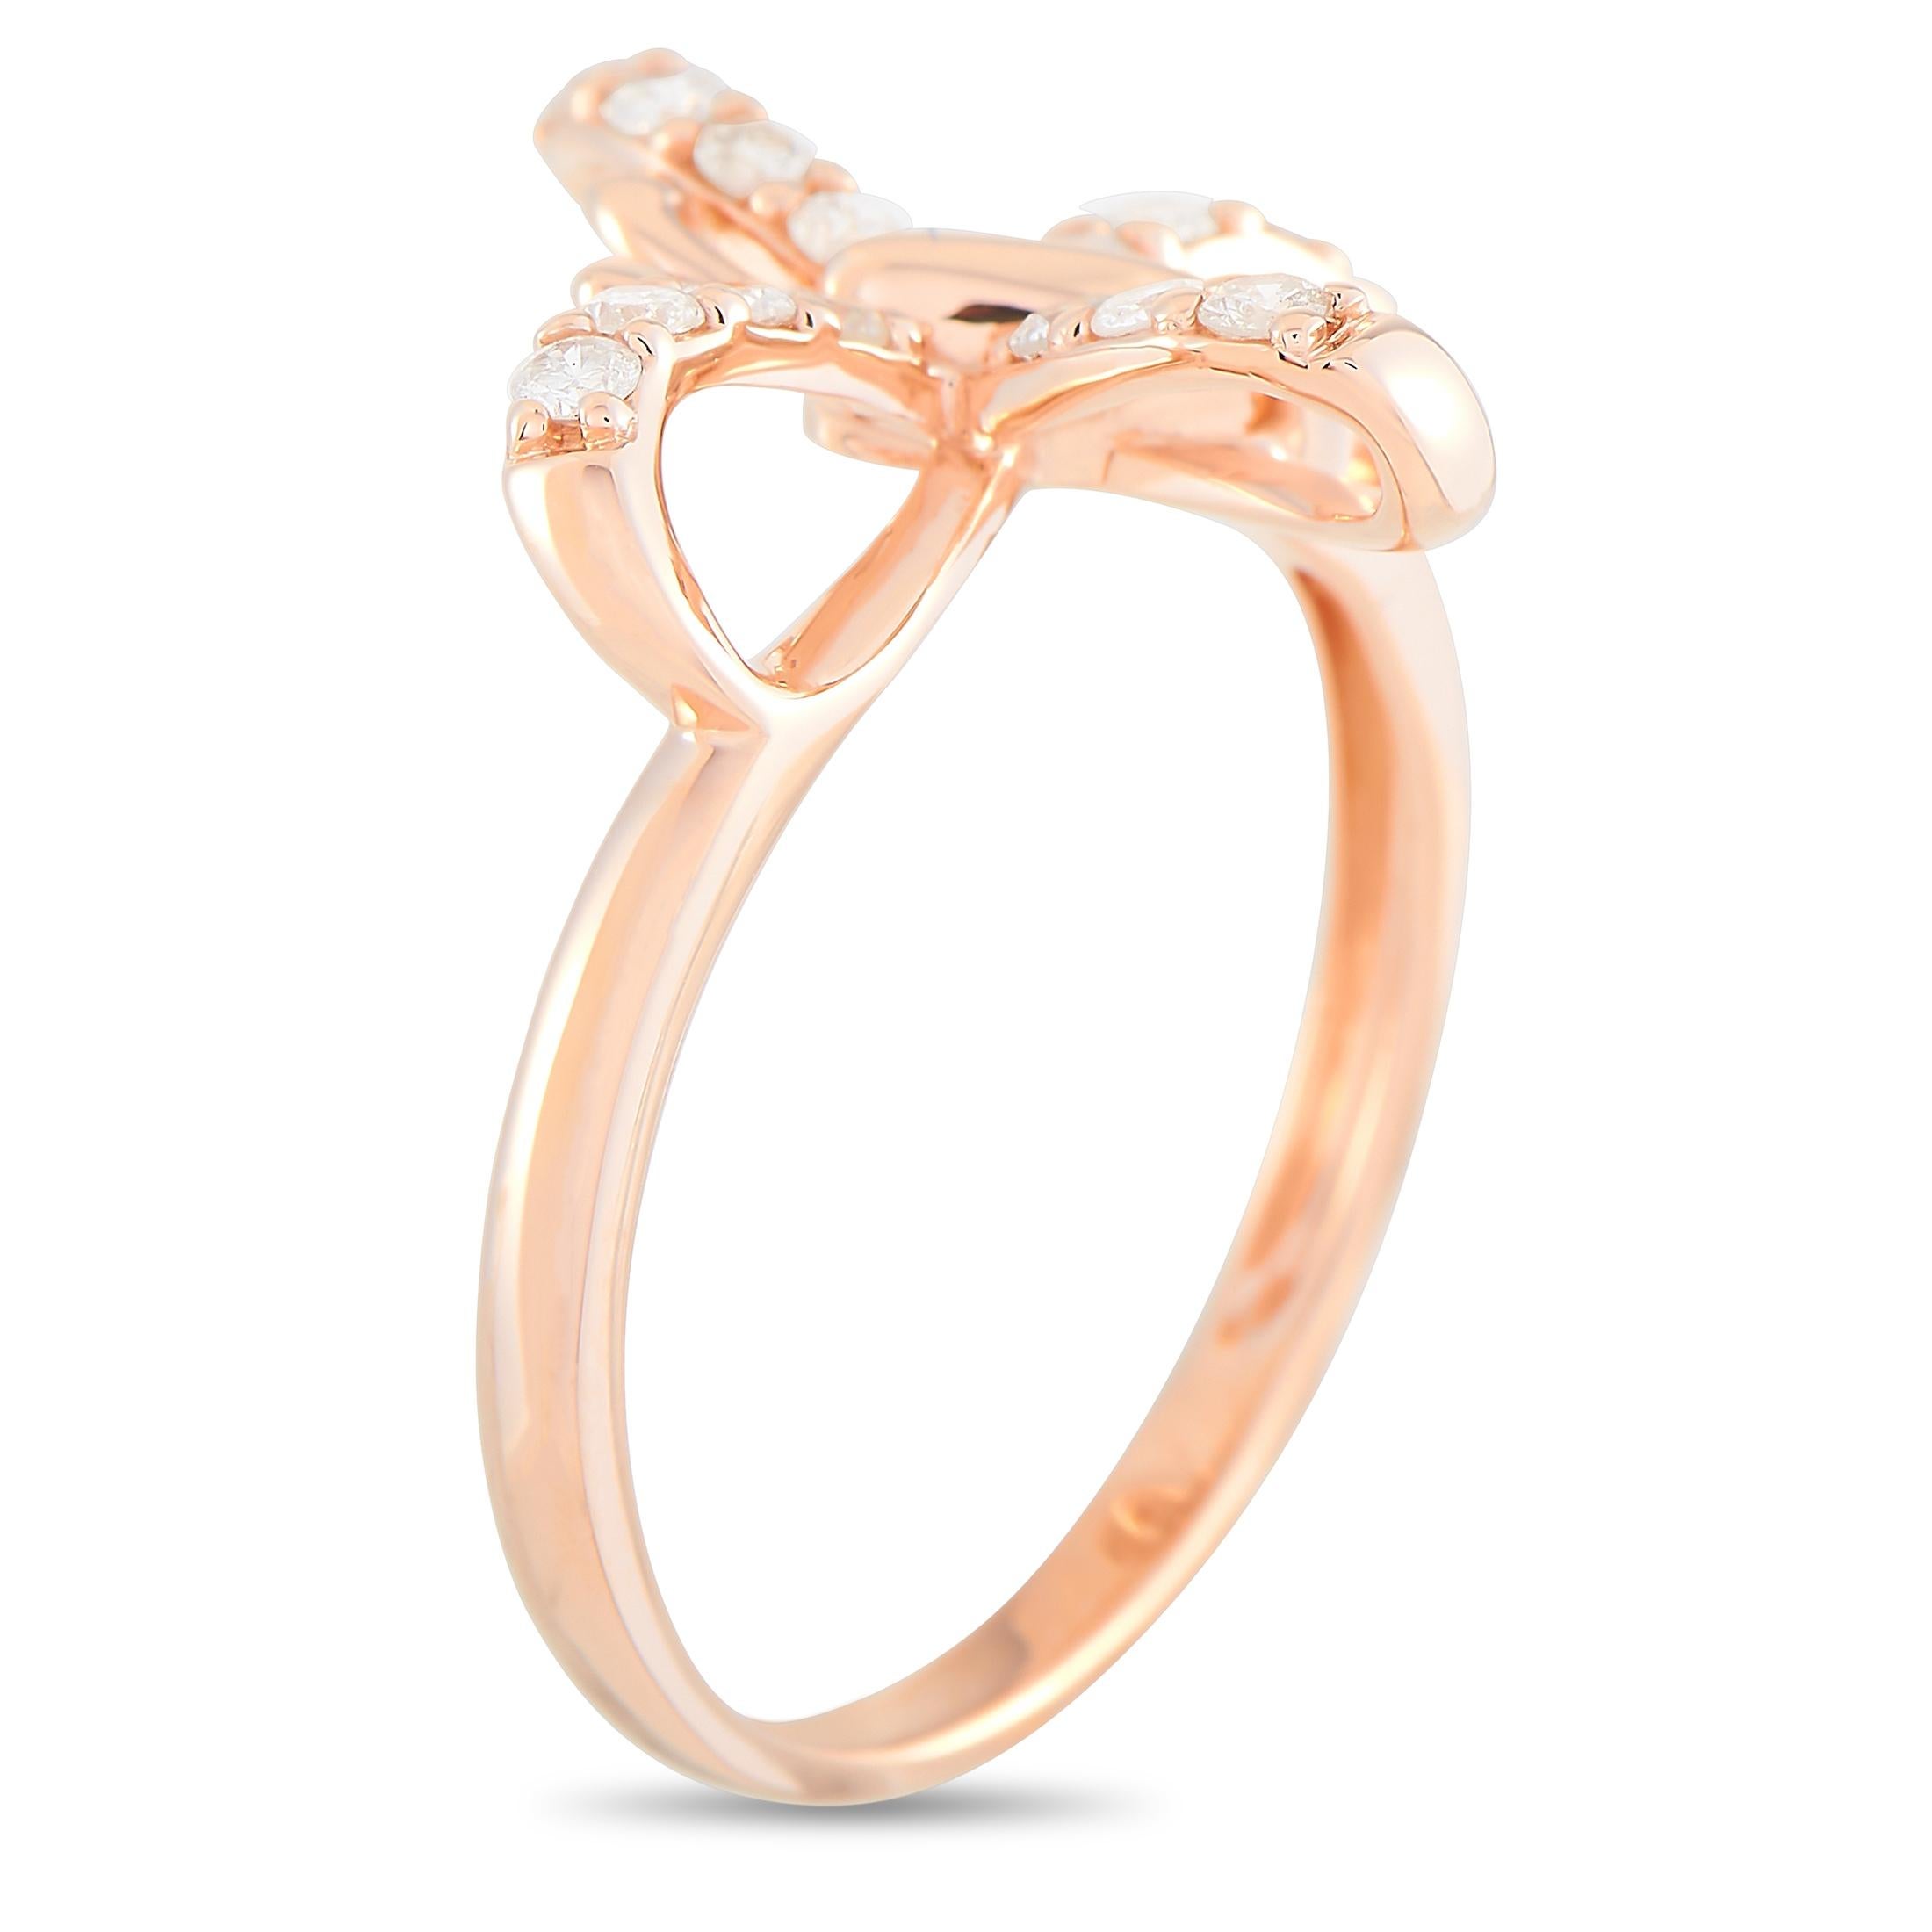 This LB Exclusive butterfly ring is made of 14K rose gold and embellished with diamonds that amount to 0.30 carats. The ring weighs 2.5 grams and boasts band thickness of 2 mm and top height of 3 mm, while top dimensions measure 16 by 17 mm.
 
